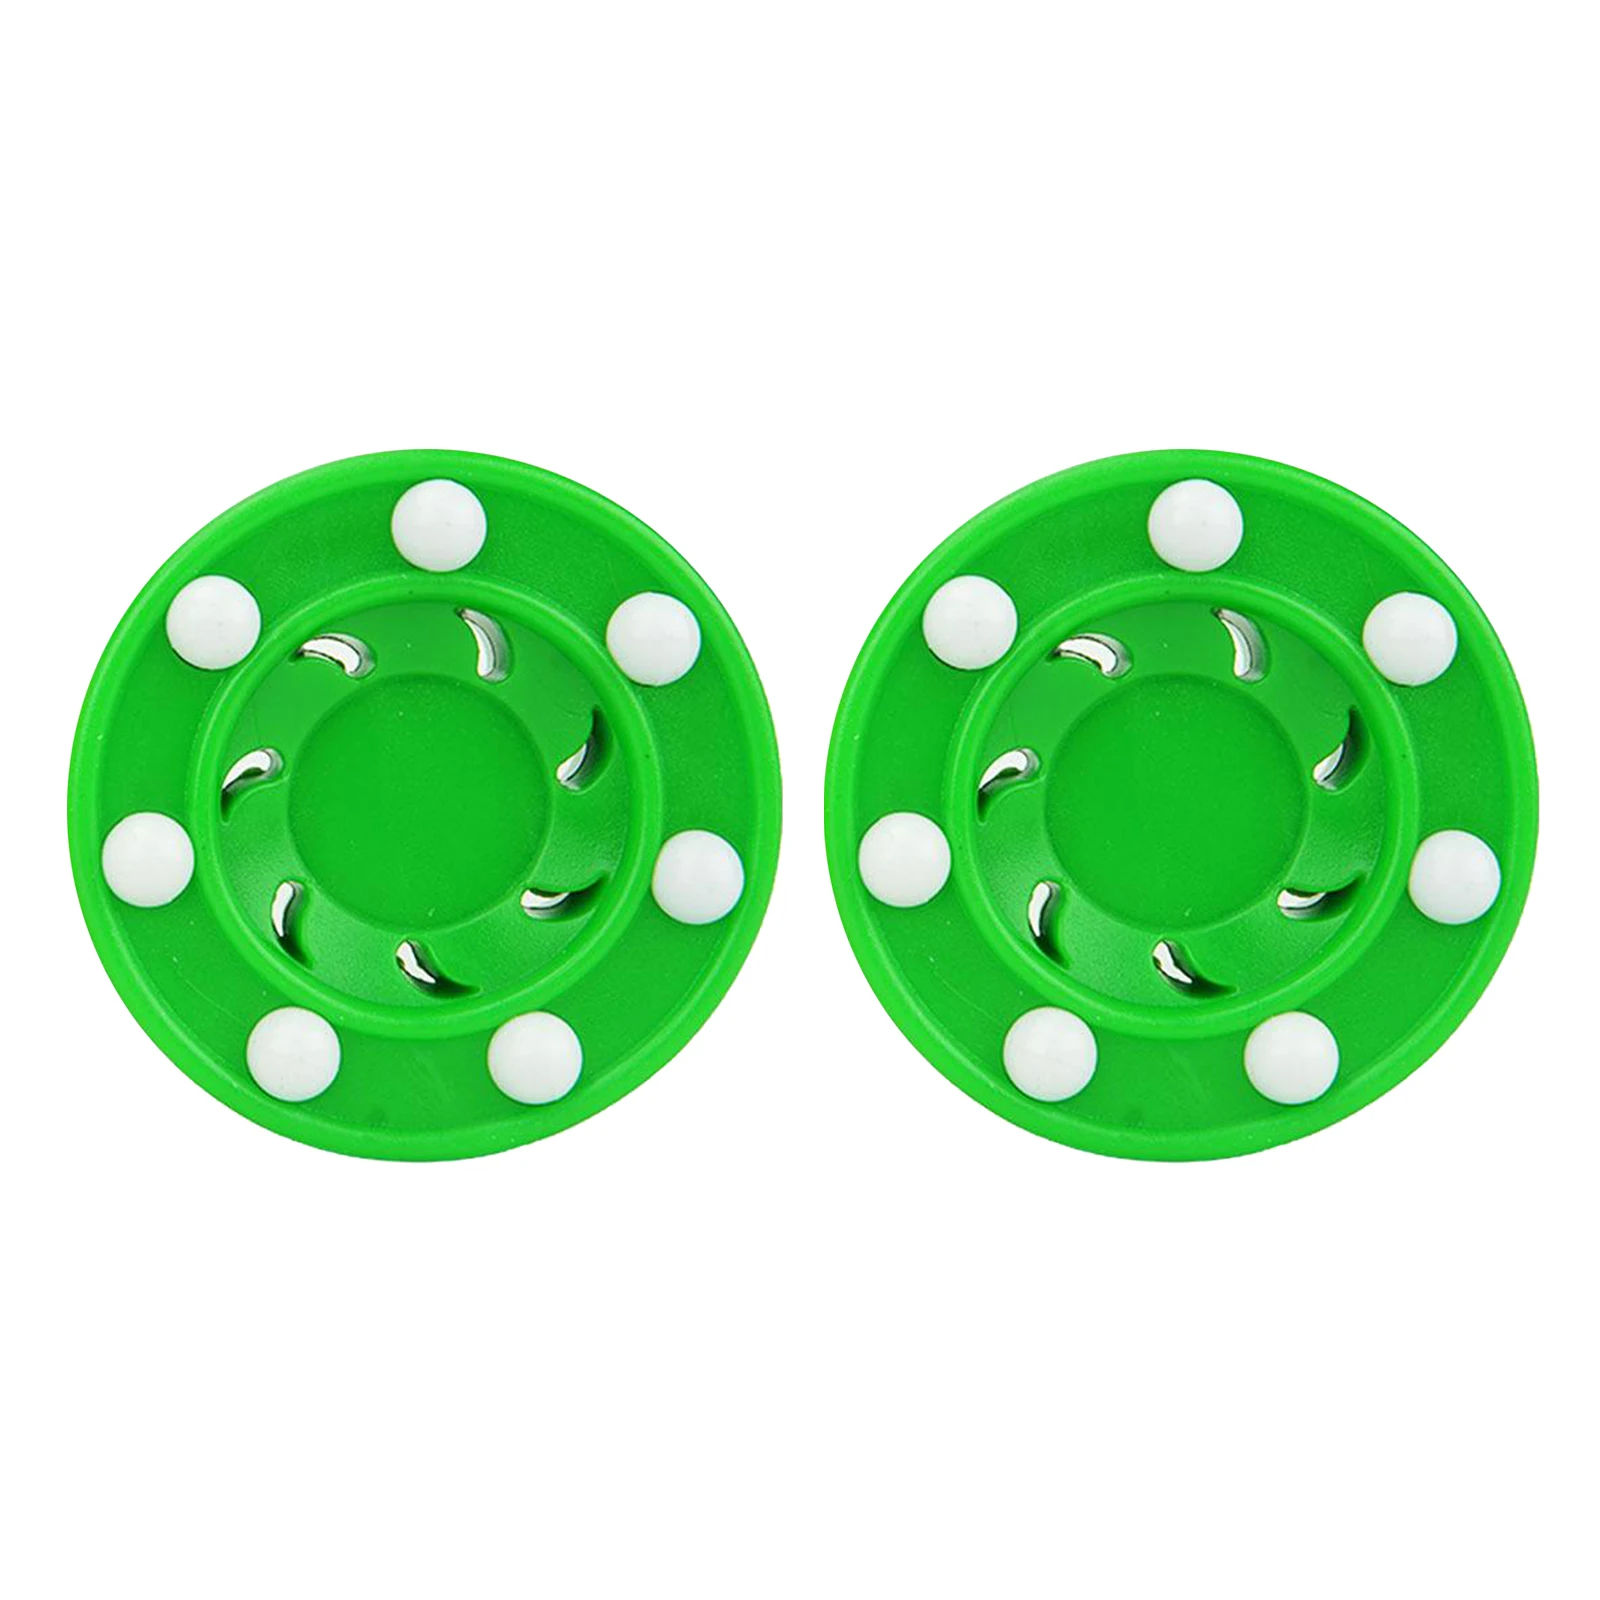 2pcs Sports Street Roller Hockey Game Puck Pro Shot Advanced manufacturing technology, high reliability and high performance